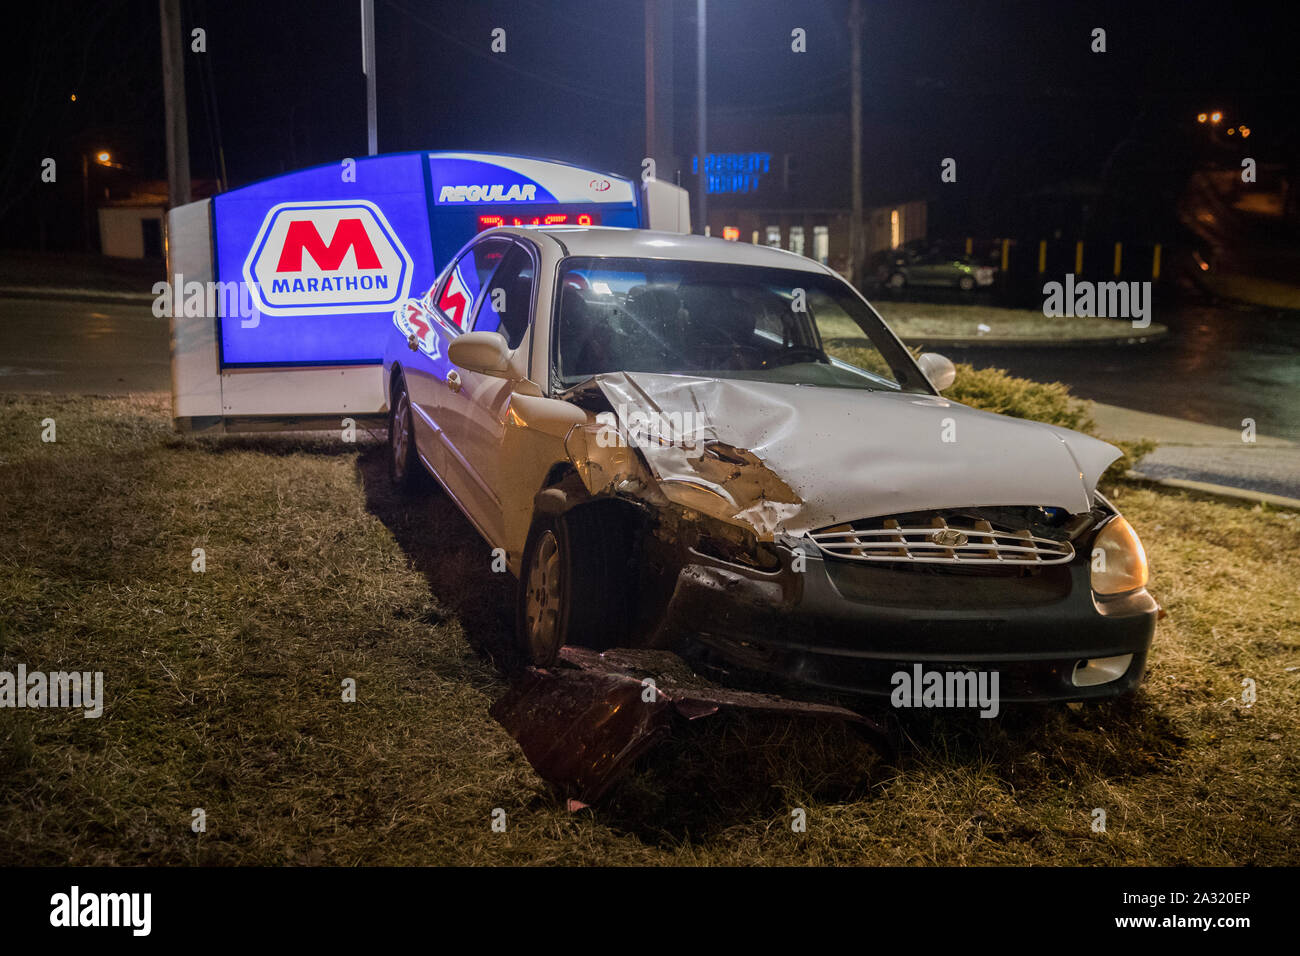 Police investigate at the scene of a car accident at the Marathon Gas station located at 1307 W 3rd St, before 2 a.m., Sunday, February 24, 2019 in Bloomington, Ind. The driver of the car fled the scene after hitting the sign, and police were looking for them in the area of Patterson. (Photo by Jeremy Hogan) Stock Photo